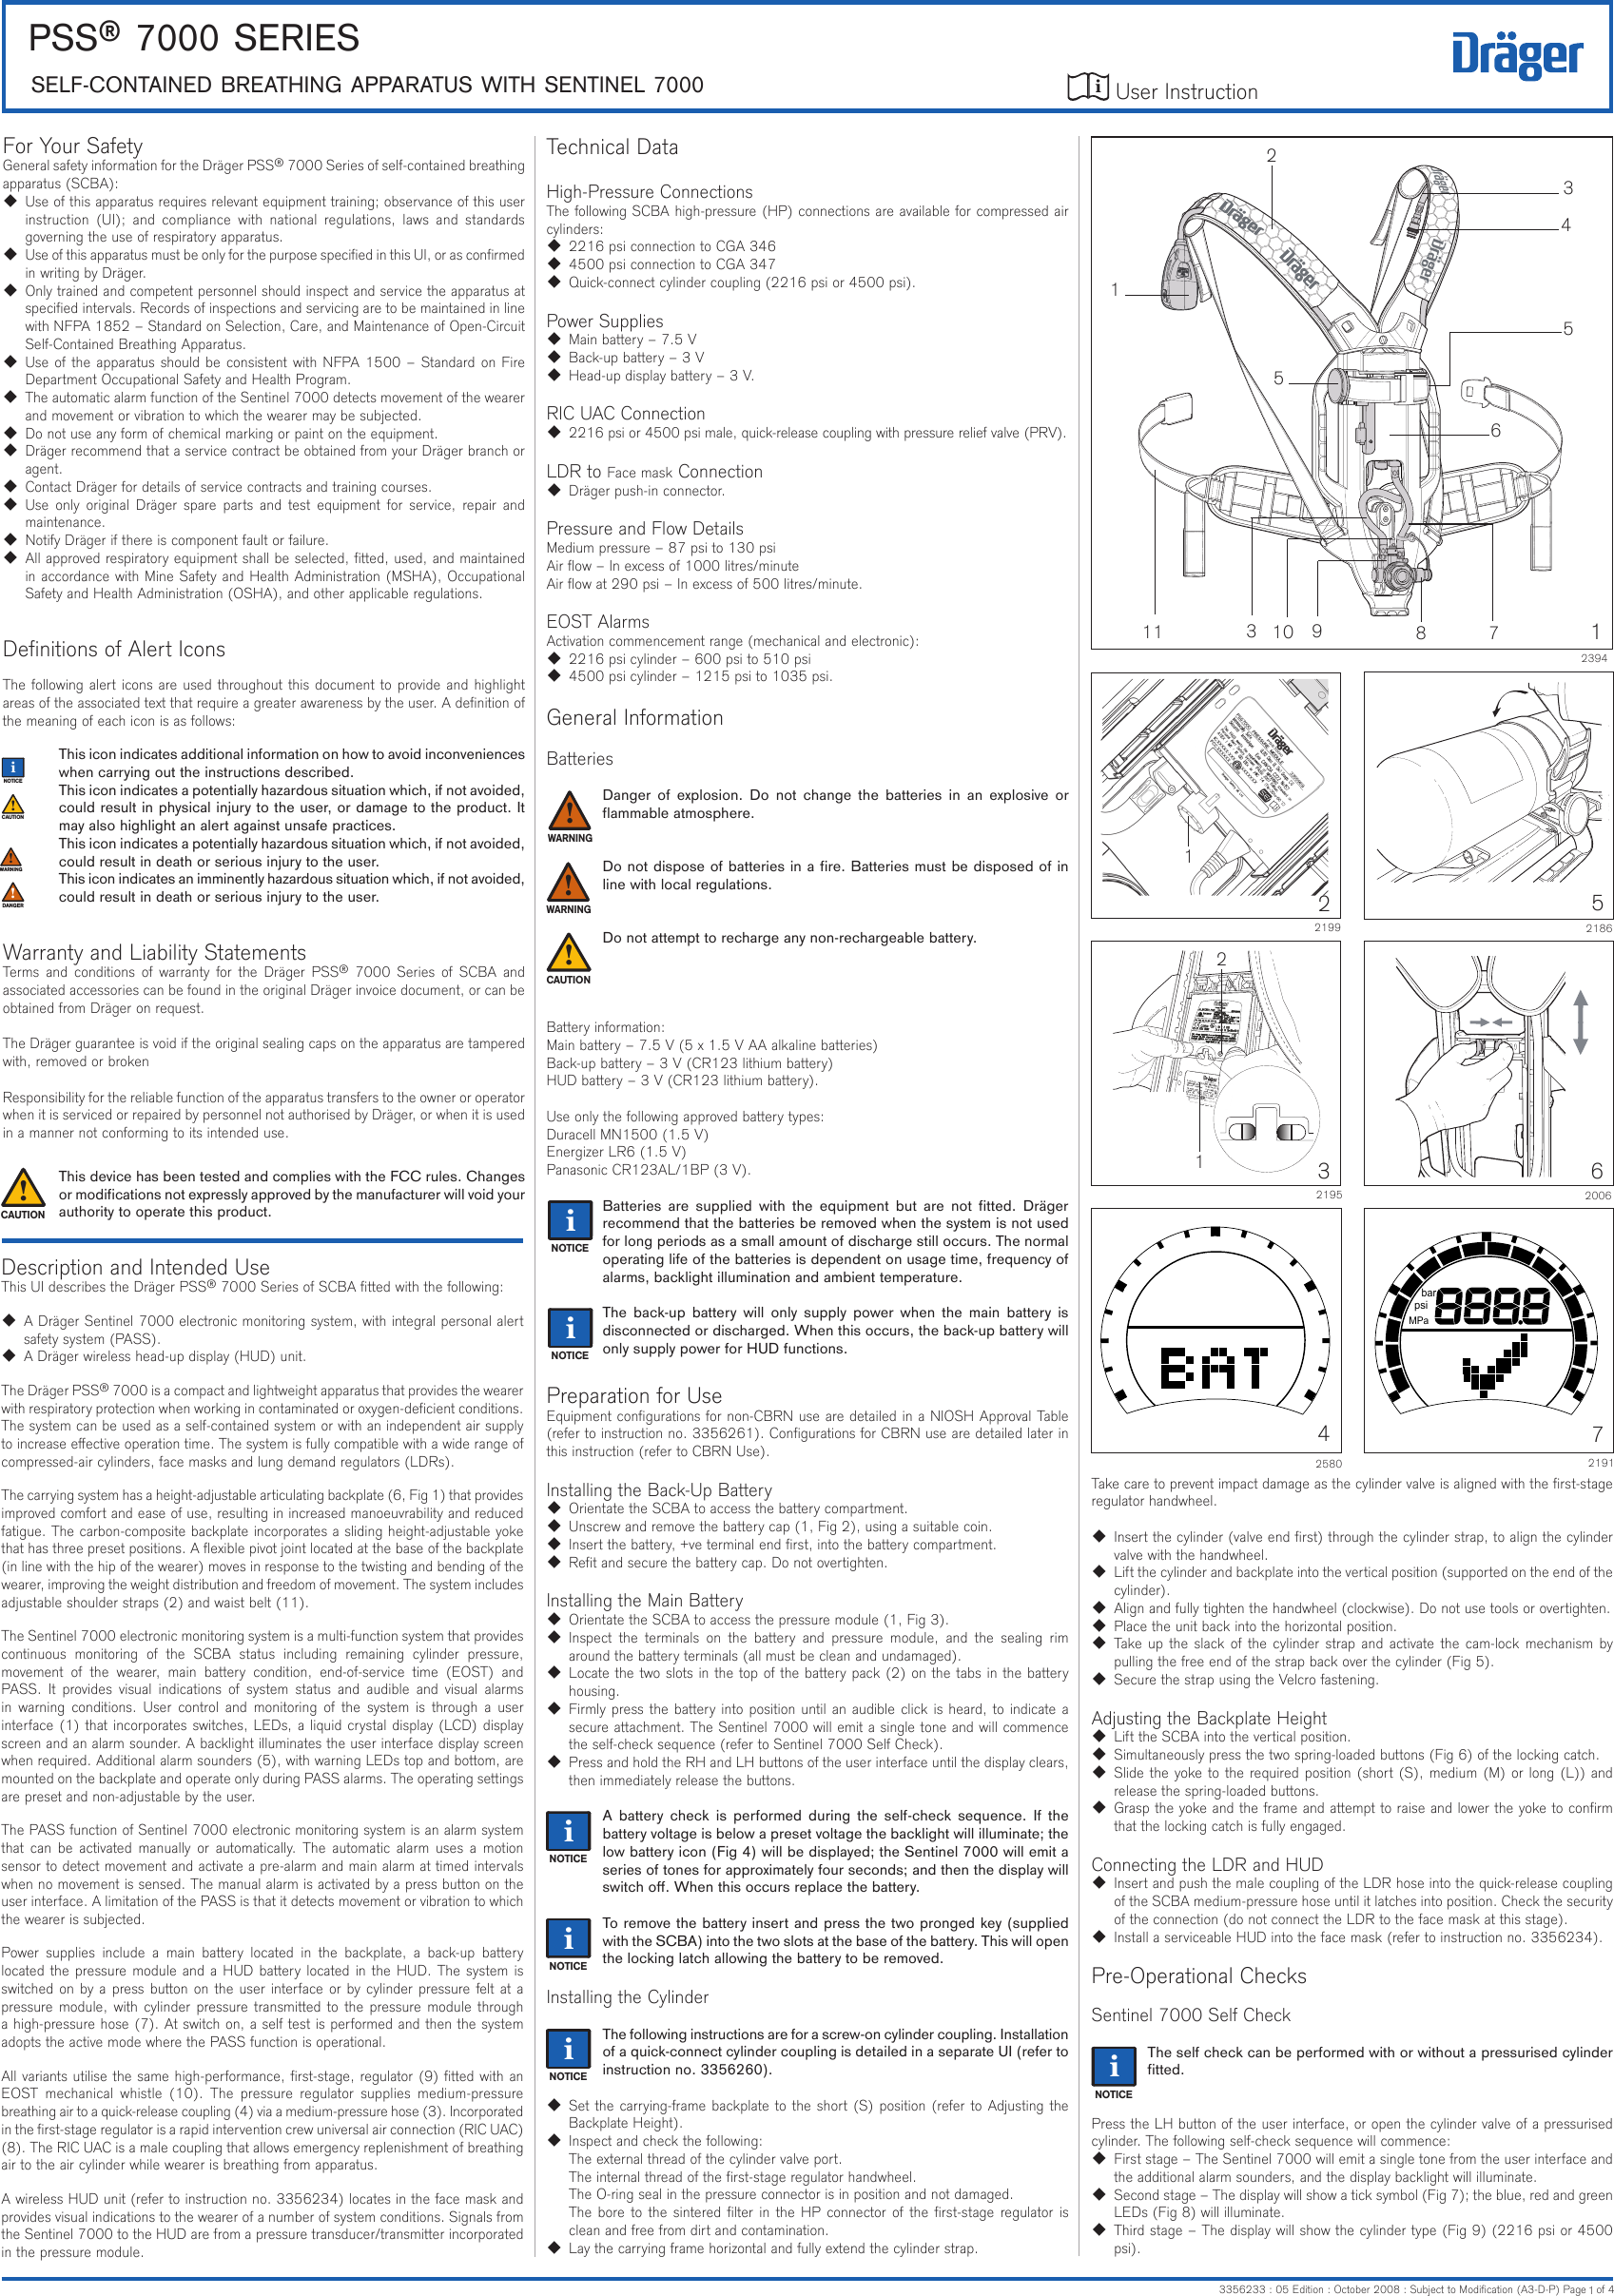 User Instruction PSS® 7000 SerieSSeLF-CONTAiNeD BreATHiNG APPArATUS wiTH SeNTiNeL 70003356233 : 05 Edition : October 2008 : Subject to Modication (A3-D-P) Page   of 4iFor Your SafetyGeneral safety information for the Dräger PSS® 7000 Series of self-contained breathing apparatus (SCBA):  Use of this apparatus requires relevant equipment training; observance of this user instruction  (UI);  and  compliance  with  national  regulations,  laws  and  standards governing the use of respiratory apparatus.  Use of this apparatus must be only for the purpose specied in this UI, or as conrmed in writing by Dräger.  Only trained and competent personnel should inspect and service the apparatus at specied intervals. Records of inspections and servicing are to be maintained in line with NFPA 1852 – Standard on Selection, Care, and Maintenance of Open-Circuit Self-Contained Breathing Apparatus.  Use of the apparatus should be consistent with NFPA 1500 – Standard on Fire Department Occupational Safety and Health Program.  The automatic alarm function of the Sentinel 7000 detects movement of the wearer and movement or vibration to which the wearer may be subjected.  Do not use any form of chemical marking or paint on the equipment.  Dräger recommend that a service contract be obtained from your Dräger branch or agent.  Contact Dräger for details of service contracts and training courses.  Use  only original  Dräger spare  parts  and test  equipment for service,  repair  and maintenance.  Notify Dräger if there is component fault or failure.  All approved respiratory equipment shall be selected, tted, used, and maintained in accordance with Mine Safety and Health Administration (MSHA), Occupational Safety and Health Administration (OSHA), and other applicable regulations.Denitions of Alert IconsThe following alert icons are used throughout this document to provide and highlight areas of the associated text that require a greater awareness by the user. A denition of the meaning of each icon is as follows:This icon indicates additional information on how to avoid inconveniences when carrying out the instructions described.This icon indicates a potentially hazardous situation which, if not avoided, could result in physical injury to the user, or damage to the product. It may also highlight an alert against unsafe practices.This icon indicates a potentially hazardous situation which, if not avoided, could result in death or serious injury to the user.This icon indicates an imminently hazardous situation which, if not avoided, could result in death or serious injury to the user.Warranty and Liability StatementsTerms  and  conditions  of  warranty  for the  Dräger  PSS®  7000  Series  of  SCBA  and associated accessories can be found in the original Dräger invoice document, or can be obtained from Dräger on request.The Dräger guarantee is void if the original sealing caps on the apparatus are tampered with, removed or brokenResponsibility for the reliable function of the apparatus transfers to the owner or operator when it is serviced or repaired by personnel not authorised by Dräger, or when it is used in a manner not conforming to its intended use.This device has been tested and complies with the FCC rules. Changes or modications not expressly approved by the manufacturer will void your authority to operate this product.Technical DataHigh-Pressure ConnectionsThe following SCBA high-pressure (HP) connections are available for compressed air cylinders: 2216 psi connection to CGA 346 4500 psi connection to CGA 347  Quick-connect cylinder coupling (2216 psi or 4500 psi).Power Supplies Main battery – 7.5 V  Back-up battery – 3 V  Head-up display battery – 3 V.RIC UAC Connection  2216 psi or 4500 psi male, quick-release coupling with pressure relief valve (PRV).LDR to Face mask Connection  Dräger push-in connector.Pressure and Flow DetailsMedium pressure – 87 psi to 130 psiAir ow – In excess of 1000 litres/minuteAir ow at 290 psi – In excess of 500 litres/minute.EOST AlarmsActivation commencement range (mechanical and electronic): 2216 psi cylinder – 600 psi to 510 psi 4500 psi cylinder – 1215 psi to 1035 psi.General InformationBatteriesDanger  of  explosion.  Do  not  change  the  batteries  in  an  explosive  or ammable atmosphere.Do not dispose of batteries in a re. Batteries must be disposed of in line with local regulations.Do not attempt to recharge any non-rechargeable battery.Battery information:Main battery – 7.5 V (5 x 1.5 V AA alkaline batteries)Back-up battery – 3 V (CR123 lithium battery)HUD battery – 3 V (CR123 lithium battery).Use only the following approved battery types:Duracell MN1500 (1.5 V)Energizer LR6 (1.5 V)Panasonic CR123AL/1BP (3 V).Batteries  are  supplied  with  the  equipment  but  are  not  tted.  Dräger recommend that the batteries be removed when the system is not used for long periods as a small amount of discharge still occurs. The normal operating life of the batteries is dependent on usage time, frequency of alarms, backlight illumination and ambient temperature.The  back-up  battery  will  only  supply  power  when  the  main  battery  is disconnected or discharged. When this occurs, the back-up battery will only supply power for HUD functions.Preparation for UseEquipment congurations for non-CBRN use are detailed in a NIOSH Approval Table (refer to instruction no. 3356261). Congurations for CBRN use are detailed later in this instruction (refer to CBRN Use).Installing the Back-Up Battery  Orientate the SCBA to access the battery compartment.  Unscrew and remove the battery cap (1, Fig 2), using a suitable coin.  Insert the battery, +ve terminal end rst, into the battery compartment.  Ret and secure the battery cap. Do not overtighten.Installing the Main Battery  Orientate the SCBA to access the pressure module (1, Fig 3).  Inspect  the  terminals  on  the  battery  and  pressure  module,  and  the  sealing  rim around the battery terminals (all must be clean and undamaged).  Locate the two slots in the top of the battery pack (2) on the tabs in the battery housing.  Firmly press the battery into position until an audible click is heard, to indicate a secure attachment. The Sentinel 7000 will emit a single tone and will commence the self-check sequence (refer to Sentinel 7000 Self Check).  Press and hold the RH and LH buttons of the user interface until the display clears, then immediately release the buttons.A  battery  check  is  performed  during  the  self-check  sequence.  If  the battery voltage is below a preset voltage the backlight will illuminate; the low battery icon (Fig 4) will be displayed; the Sentinel 7000 will emit a series of tones for approximately four seconds; and then the display will switch o. When this occurs replace the battery.To remove the battery insert and press the two pronged key (supplied with the SCBA) into the two slots at the base of the battery. This will open the locking latch allowing the battery to be removed.Installing the CylinderThe following instructions are for a screw-on cylinder coupling. Installation of a quick-connect cylinder coupling is detailed in a separate UI (refer to instruction no. 3356260).  Set the carrying-frame backplate to the short (S) position (refer to Adjusting the Backplate Height).  Inspect and check the following:The external thread of the cylinder valve port.The internal thread of the rst-stage regulator handwheel.The O-ring seal in the pressure connector is in position and not damaged.The bore to the sintered lter in the HP connector of the rst-stage regulator is clean and free from dirt and contamination.  Lay the carrying frame horizontal and fully extend the cylinder strap.MPapsibar721914258022199132195216200621865Take care to prevent impact damage as the cylinder valve is aligned with the rst-stage regulator handwheel.  Insert the cylinder (valve end rst) through the cylinder strap, to align the cylinder valve with the handwheel.  Lift the cylinder and backplate into the vertical position (supported on the end of the cylinder).  Align and fully tighten the handwheel (clockwise). Do not use tools or overtighten.  Place the unit back into the horizontal position.  Take up the  slack of the cylinder  strap  and activate the cam-lock mechanism by pulling the free end of the strap back over the cylinder (Fig 5).  Secure the strap using the Velcro fastening.Adjusting the Backplate Height  Lift the SCBA into the vertical position.  Simultaneously press the two spring-loaded buttons (Fig 6) of the locking catch.  Slide the yoke to the required position (short (S), medium (M) or long (L)) and release the spring-loaded buttons.  Grasp the yoke and the frame and attempt to raise and lower the yoke to conrm that the locking catch is fully engaged.Connecting the LDR and HUD  Insert and push the male coupling of the LDR hose into the quick-release coupling of the SCBA medium-pressure hose until it latches into position. Check the security of the connection (do not connect the LDR to the face mask at this stage).  Install a serviceable HUD into the face mask (refer to instruction no. 3356234).Pre-Operational ChecksSentinel 7000 Self CheckThe self check can be performed with or without a pressurised cylinder tted.Press the LH button of the user interface, or open the cylinder valve of a pressurised cylinder. The following self-check sequence will commence:  First stage – The Sentinel 7000 will emit a single tone from the user interface and the additional alarm sounders, and the display backlight will illuminate.  Second stage – The display will show a tick symbol (Fig 7); the blue, red and green LEDs (Fig 8) will illuminate.  Third stage – The display will show the cylinder type (Fig 9) (2216 psi or 4500 psi).iiiiii!iiii!!ii!Description and Intended UseThis UI describes the Dräger PSS® 7000 Series of SCBA tted with the following:  A Dräger Sentinel 7000 electronic monitoring system, with integral personal alert safety system (PASS).  A Dräger wireless head-up display (HUD) unit.The Dräger PSS® 7000 is a compact and lightweight apparatus that provides the wearer with respiratory protection when working in contaminated or oxygen-decient conditions. The system can be used as a self-contained system or with an independent air supply to increase eective operation time. The system is fully compatible with a wide range of compressed-air cylinders, face masks and lung demand regulators (LDRs).The carrying system has a height-adjustable articulating backplate (6, Fig 1) that provides improved comfort and ease of use, resulting in increased manoeuvrability and reduced fatigue. The carbon-composite backplate incorporates a sliding height-adjustable yoke that has three preset positions. A exible pivot joint located at the base of the backplate (in line with the hip of the wearer) moves in response to the twisting and bending of the wearer, improving the weight distribution and freedom of movement. The system includes adjustable shoulder straps (2) and waist belt (11).The Sentinel 7000 electronic monitoring system is a multi-function system that provides continuous  monitoring  of  the  SCBA  status  including  remaining  cylinder  pressure, movement  of  the  wearer,  main  battery  condition,  end-of-service  time  (EOST)  and PASS.  It  provides  visual  indications  of  system  status  and  audible  and  visual  alarms in  warning  conditions.  User  control  and  monitoring  of  the  system  is  through a  user interface (1) that incorporates switches, LEDs, a liquid crystal display (LCD) display screen and an alarm sounder. A backlight illuminates the user interface display screen when required. Additional alarm sounders (5), with warning LEDs top and bottom, are mounted on the backplate and operate only during PASS alarms. The operating settings are preset and non-adjustable by the user.The PASS function of Sentinel 7000 electronic monitoring system is an alarm system that  can  be  activated  manually  or  automatically.  The  automatic  alarm  uses  a  motion sensor to detect movement and activate a pre-alarm and main alarm at timed intervals when no movement is sensed. The manual alarm is activated by a press button on the user interface. A limitation of the PASS is that it detects movement or vibration to which the wearer is subjected.Power  supplies  include  a  main  battery  located  in  the  backplate,  a  back-up  battery located the pressure module and a HUD battery located in the HUD. The system is switched on by a press button on the user interface or by cylinder pressure felt at a pressure module, with cylinder pressure transmitted to the pressure module through a high-pressure hose (7). At switch on, a self test is performed and then the system adopts the active mode where the PASS function is operational.All variants utilise the same high-performance, rst-stage, regulator (9) tted with an EOST  mechanical  whistle  (10).  The  pressure  regulator  supplies  medium-pressure breathing air to a quick-release coupling (4) via a medium-pressure hose (3). Incorporated in the rst-stage regulator is a rapid intervention crew universal air connection (RIC UAC) (8). The RIC UAC is a male coupling that allows emergency replenishment of breathing air to the air cylinder while wearer is breathing from apparatus.A wireless HUD unit (refer to instruction no. 3356234) locates in the face mask and provides visual indications to the wearer of a number of system conditions. Signals from the Sentinel 7000 to the HUD are from a pressure transducer/transmitter incorporated in the pressure module.!!123941235678910411ii153!